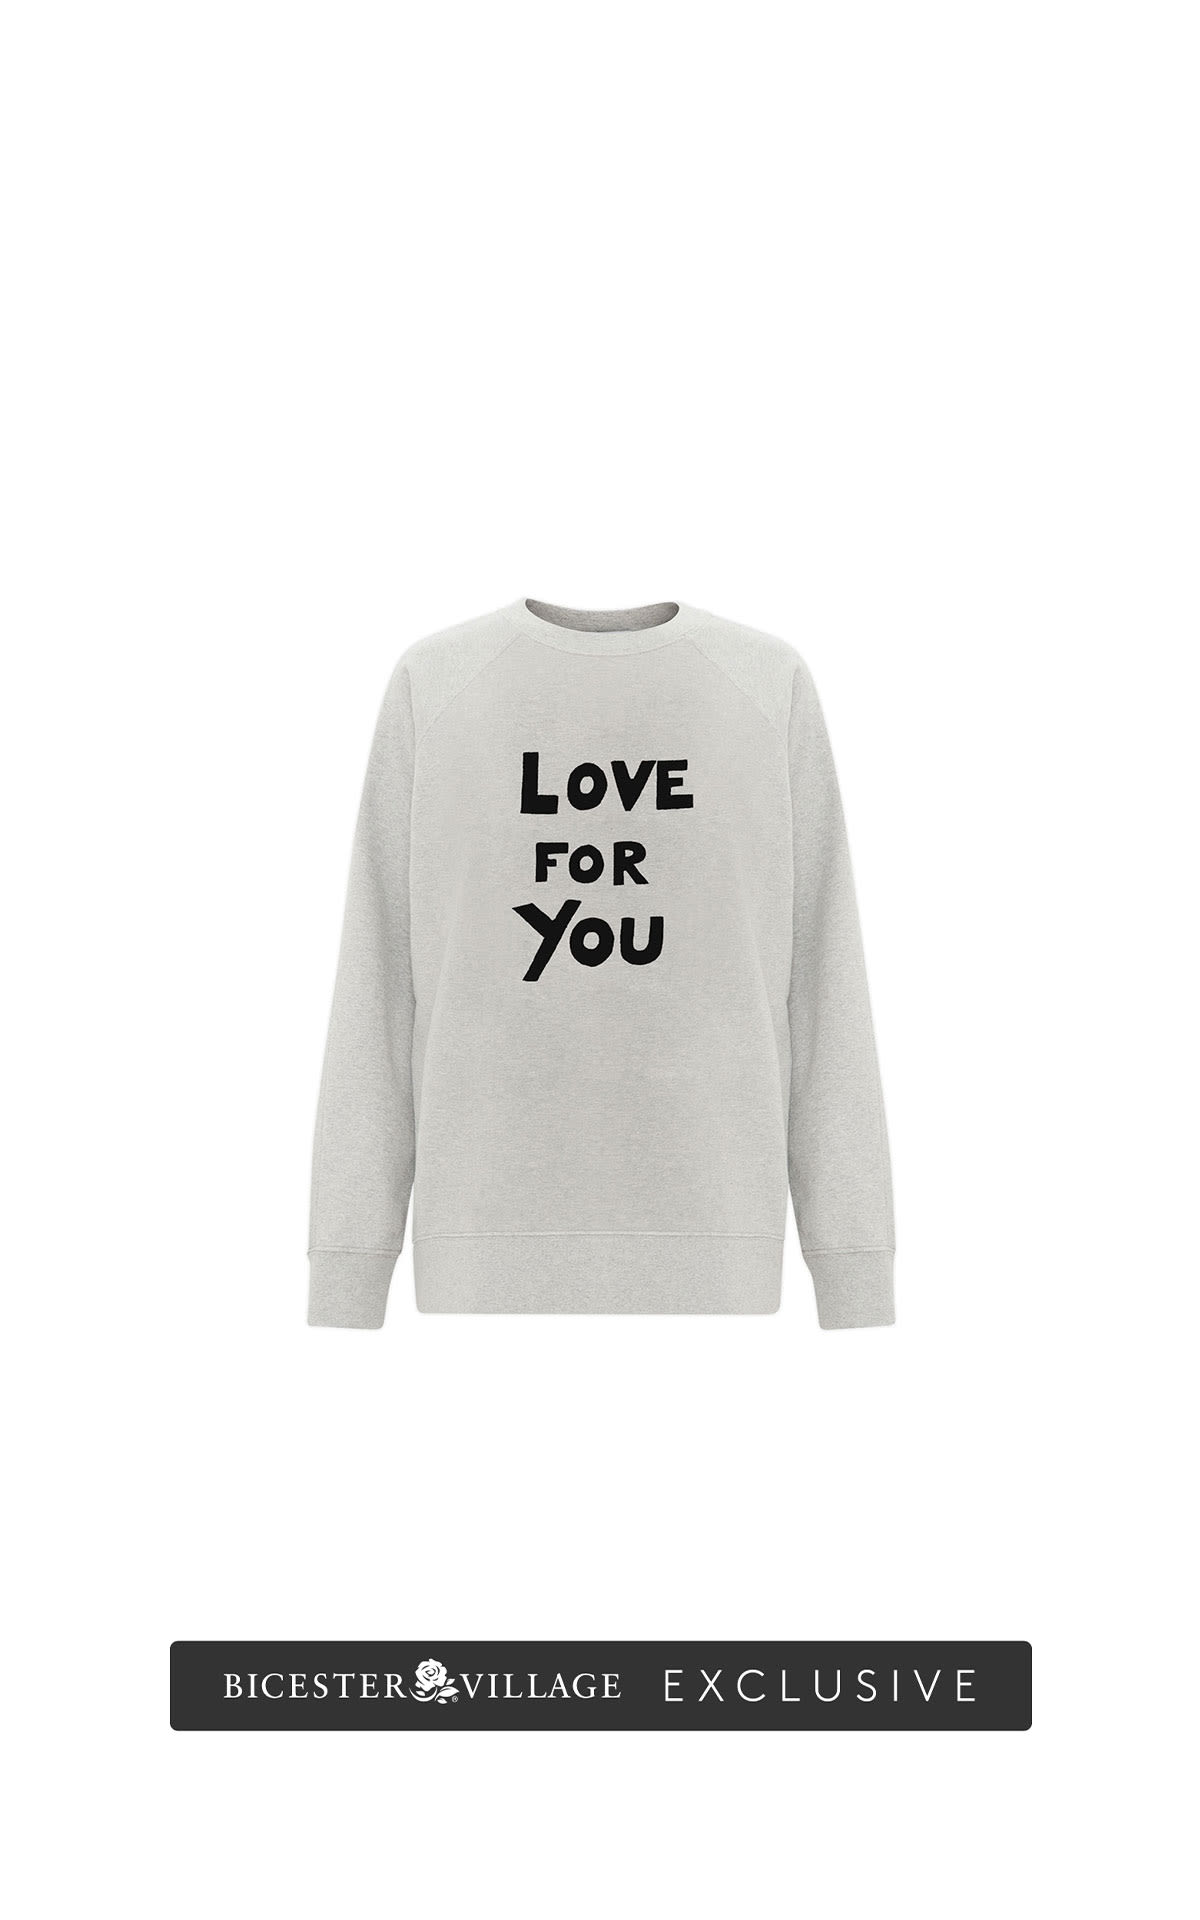 Bella Freud Love for you sweatshirt from Bicester Village